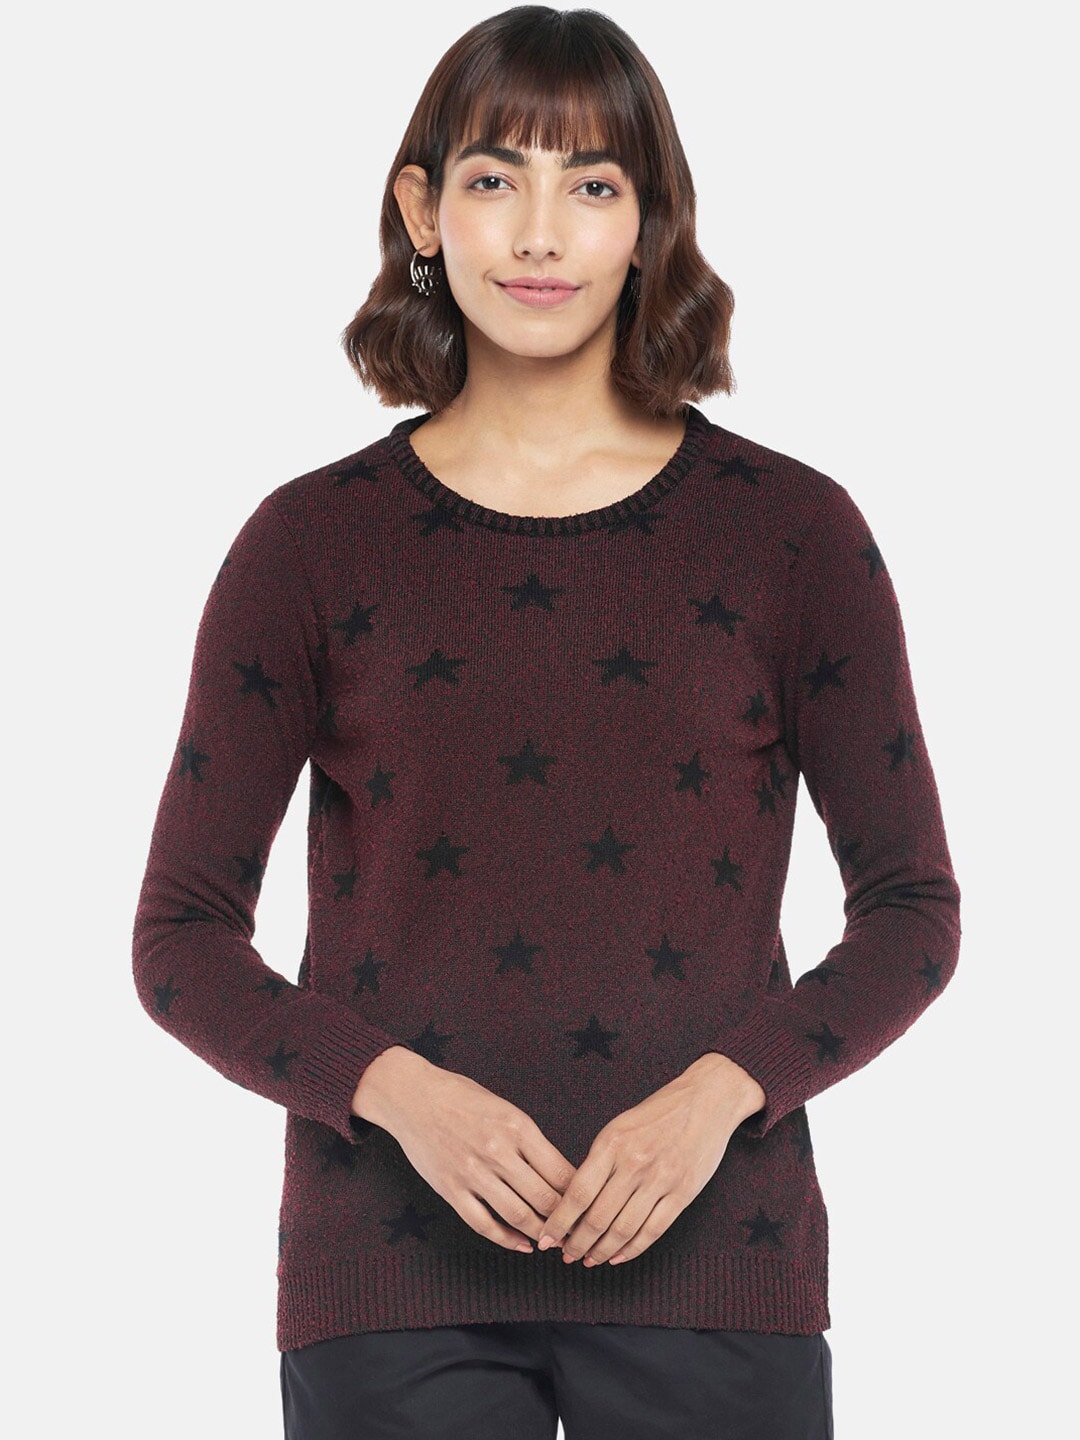 Honey by Pantaloons Women Brown & Black Printed Pullover with Fuzzy Detail Price in India